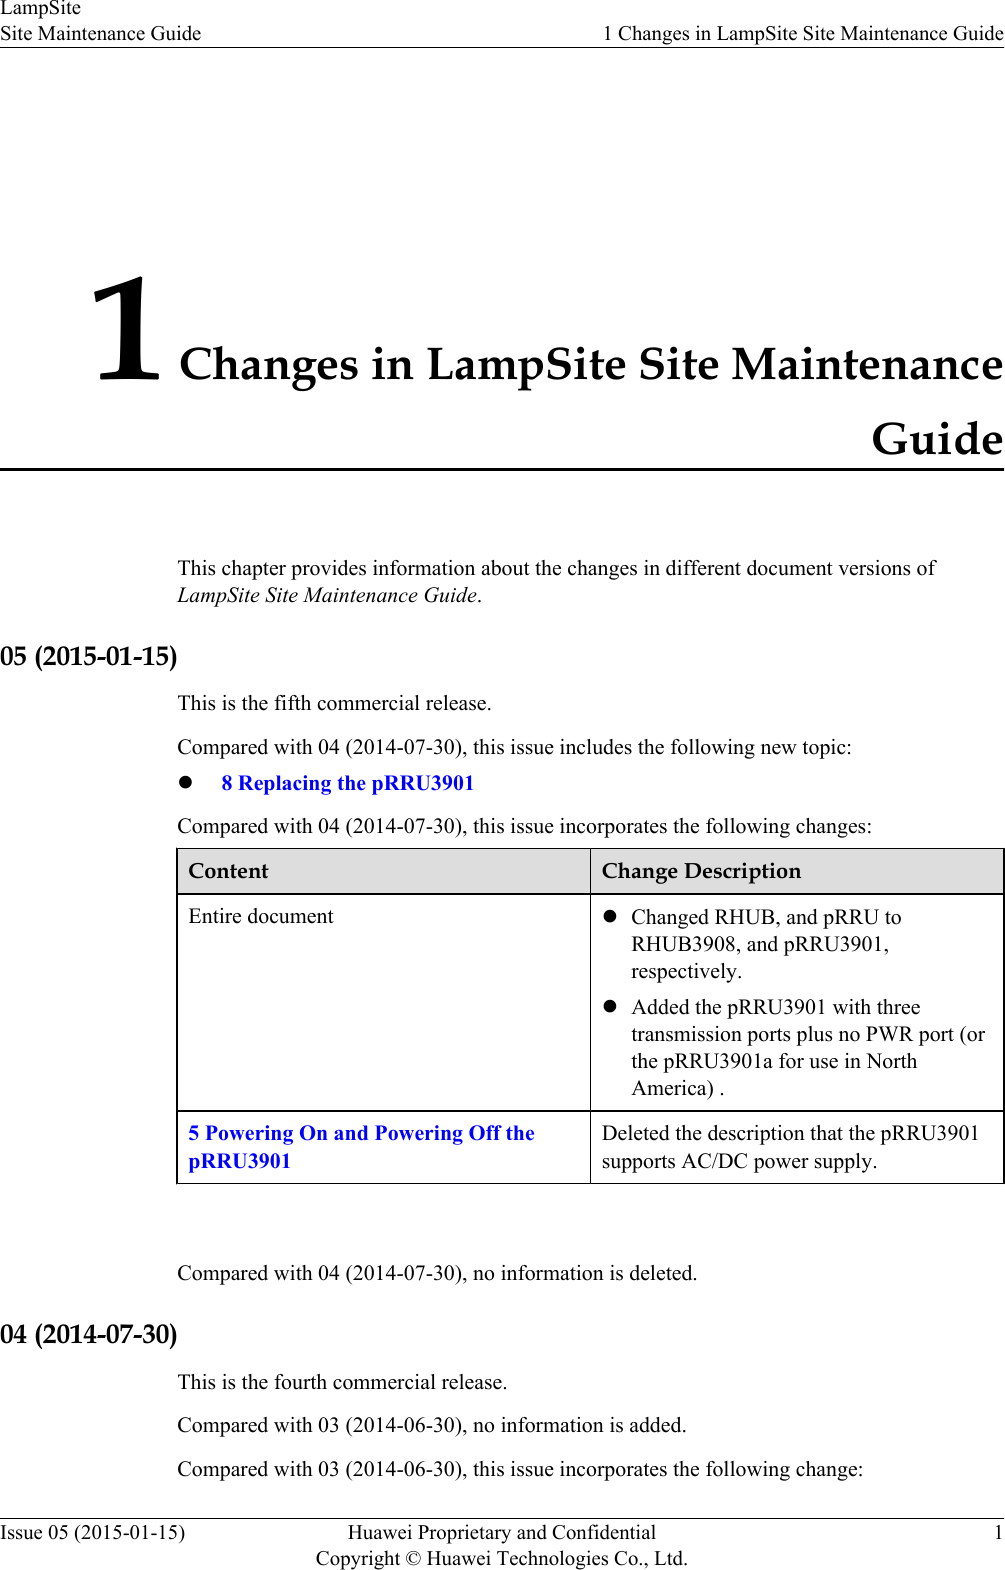 1 Changes in LampSite Site MaintenanceGuideThis chapter provides information about the changes in different document versions ofLampSite Site Maintenance Guide.05 (2015-01-15)This is the fifth commercial release.Compared with 04 (2014-07-30), this issue includes the following new topic:l8 Replacing the pRRU3901Compared with 04 (2014-07-30), this issue incorporates the following changes:Content Change DescriptionEntire document lChanged RHUB, and pRRU toRHUB3908, and pRRU3901,respectively.lAdded the pRRU3901 with threetransmission ports plus no PWR port (orthe pRRU3901a for use in NorthAmerica) .5 Powering On and Powering Off thepRRU3901Deleted the description that the pRRU3901supports AC/DC power supply. Compared with 04 (2014-07-30), no information is deleted.04 (2014-07-30)This is the fourth commercial release.Compared with 03 (2014-06-30), no information is added.Compared with 03 (2014-06-30), this issue incorporates the following change:LampSiteSite Maintenance Guide 1 Changes in LampSite Site Maintenance GuideIssue 05 (2015-01-15) Huawei Proprietary and ConfidentialCopyright © Huawei Technologies Co., Ltd.1